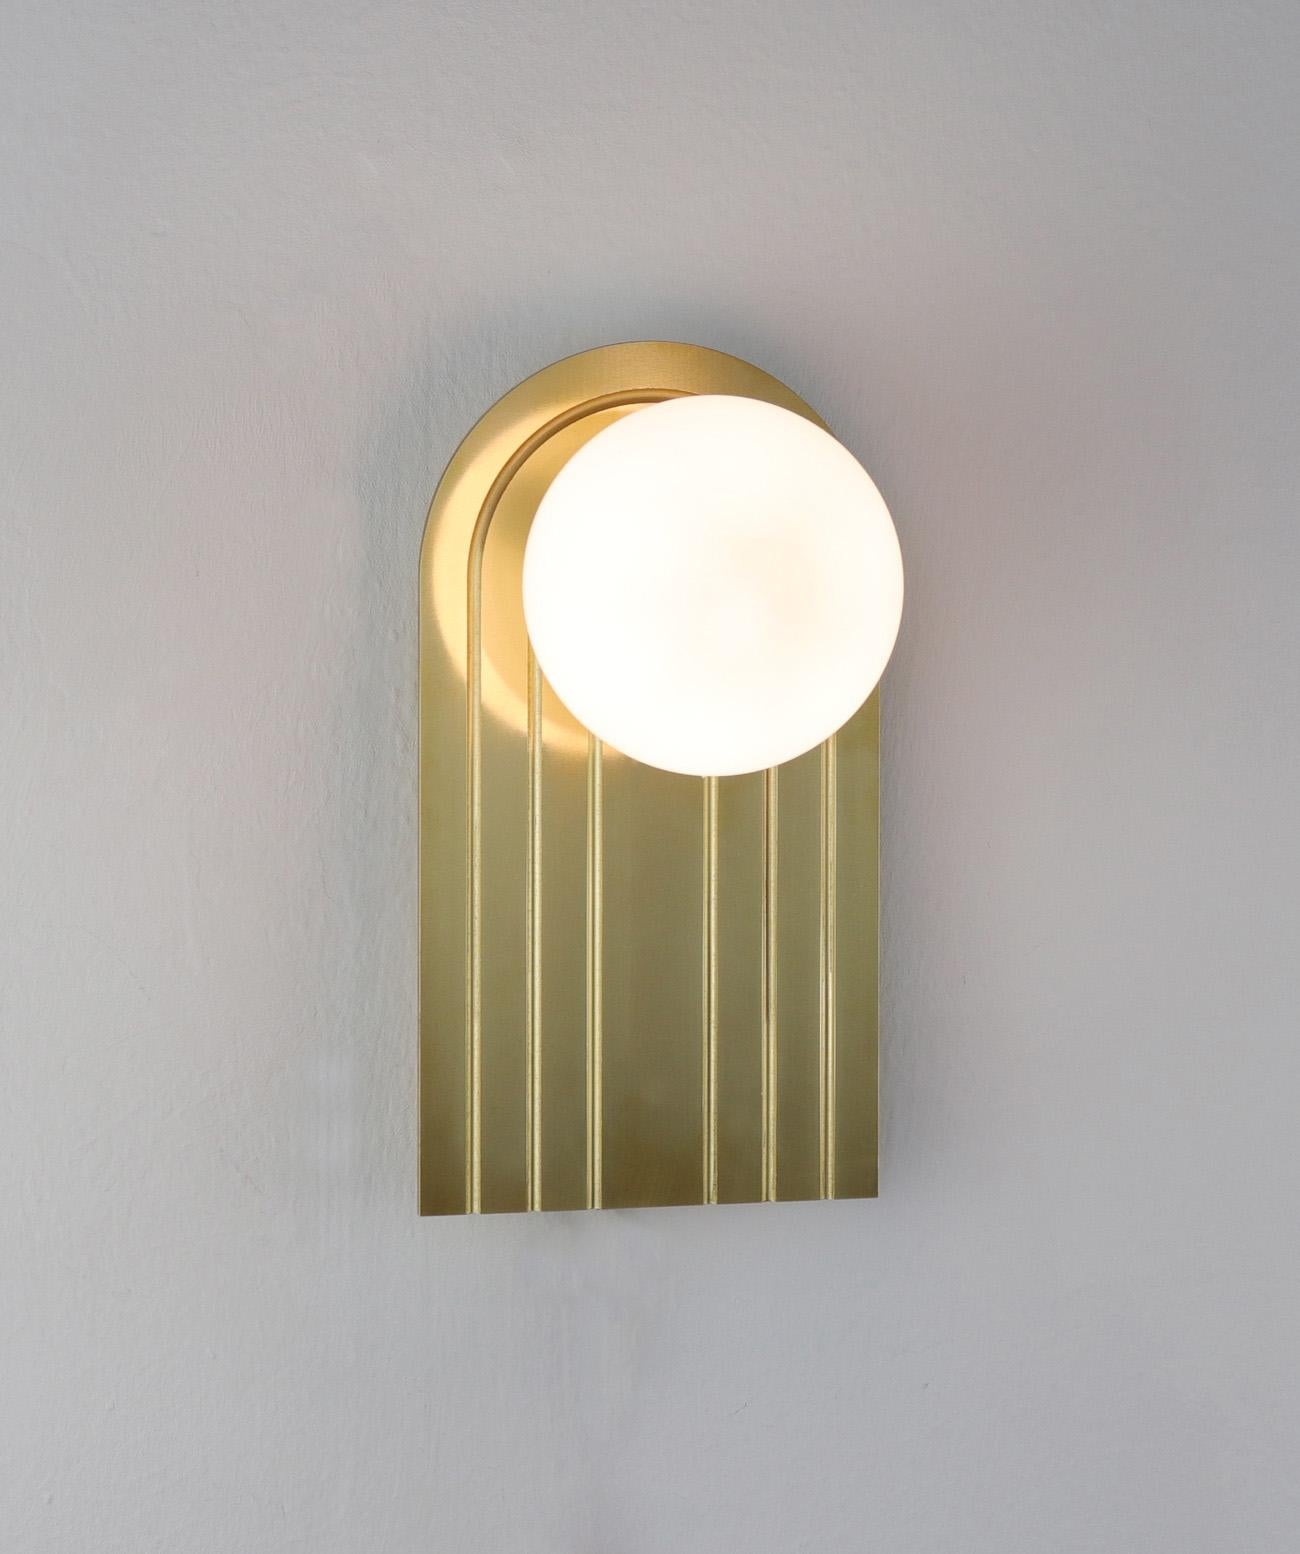 Light object 021 by Naama Hofman
Materials: Brass palette, glass ball, LED light bulb
Dimensions: 13.1 x 23.8 cm
Brass palette thickness 0.4 cm
Distance from wall 3.2 cm
Number of light balls 1
Brass pipe diameter 1 cm & 3.6 cm
Canopy